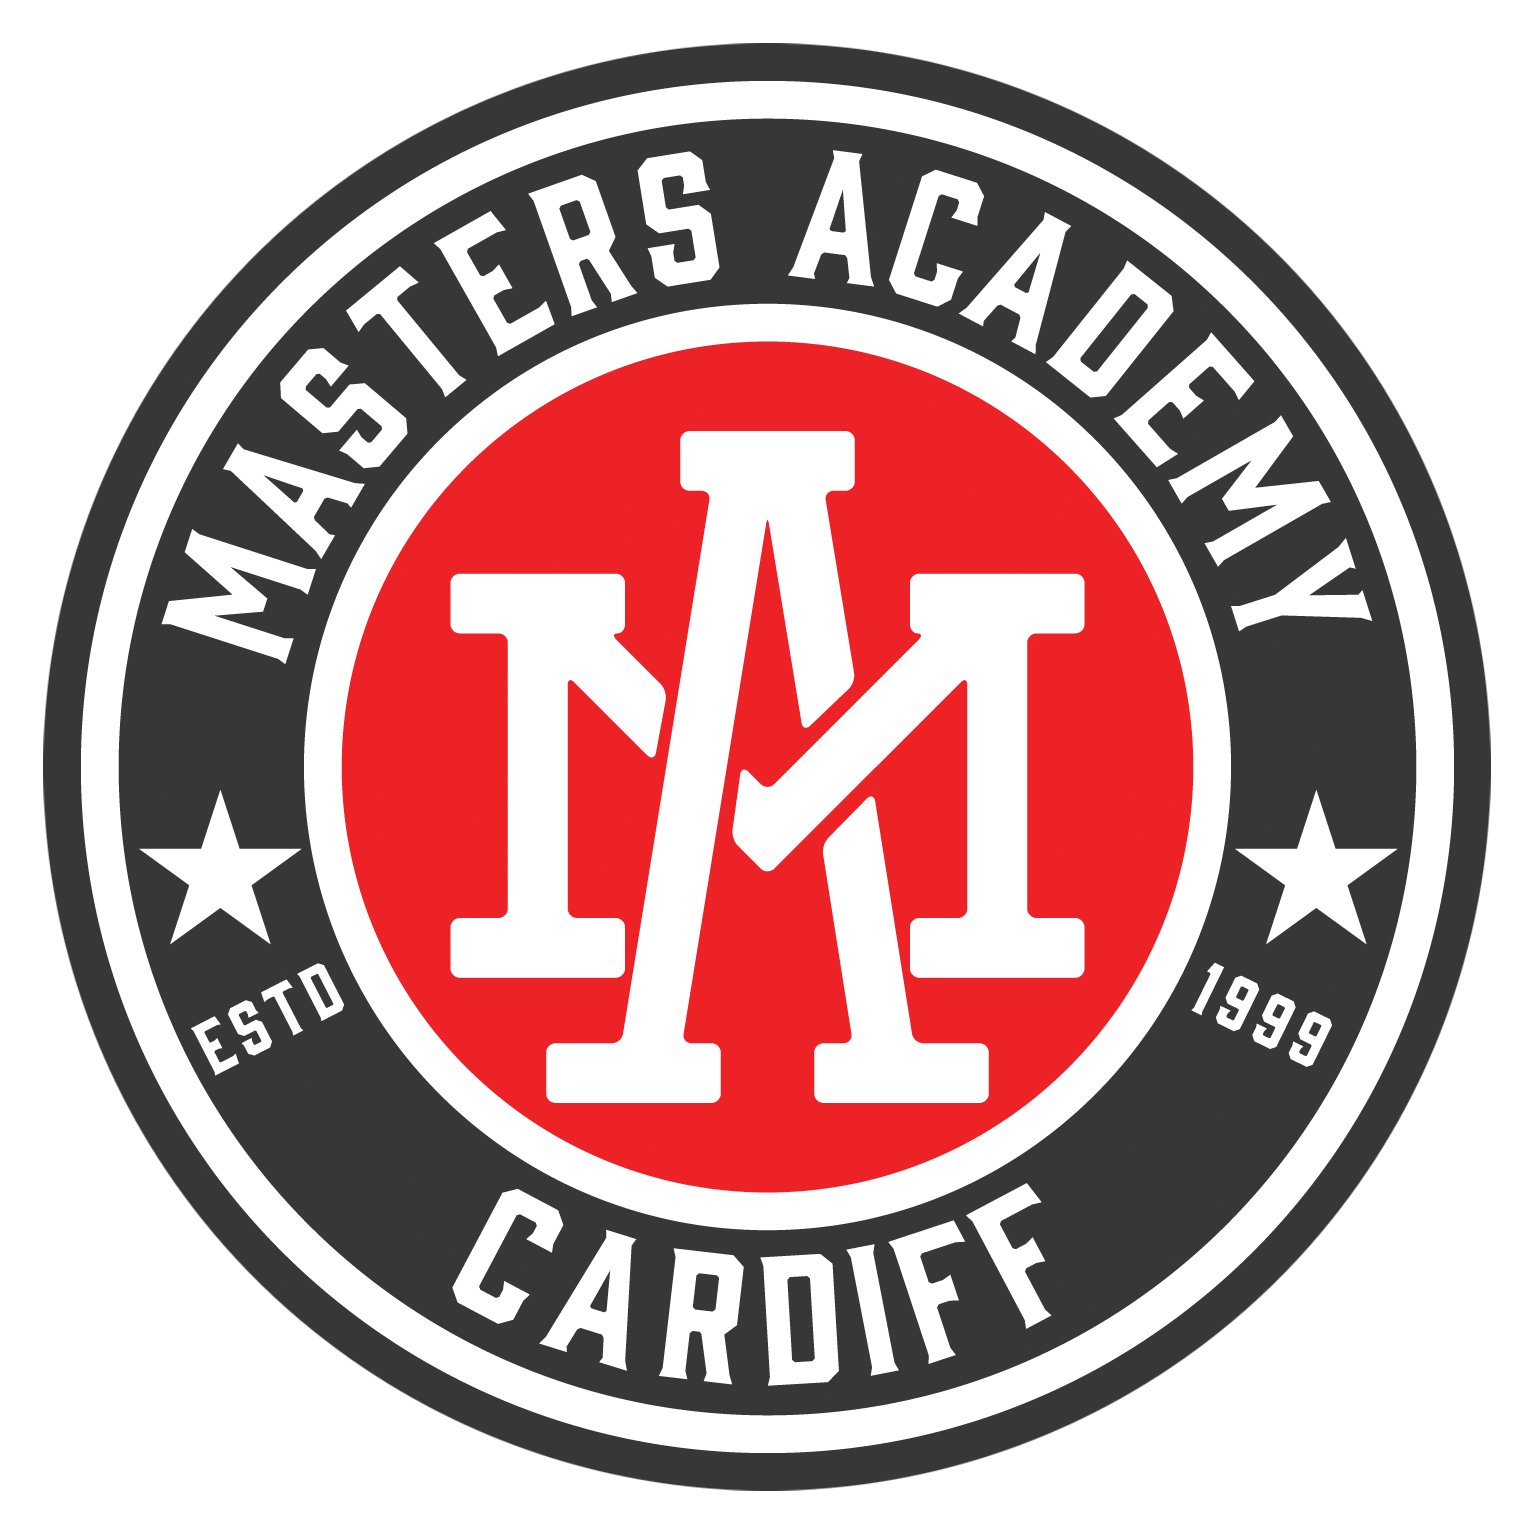 The Masters Academy Cardiff is a full time self-defence and martial arts training centre in the heart of Cardiff. Providing a full range of programmes for all.